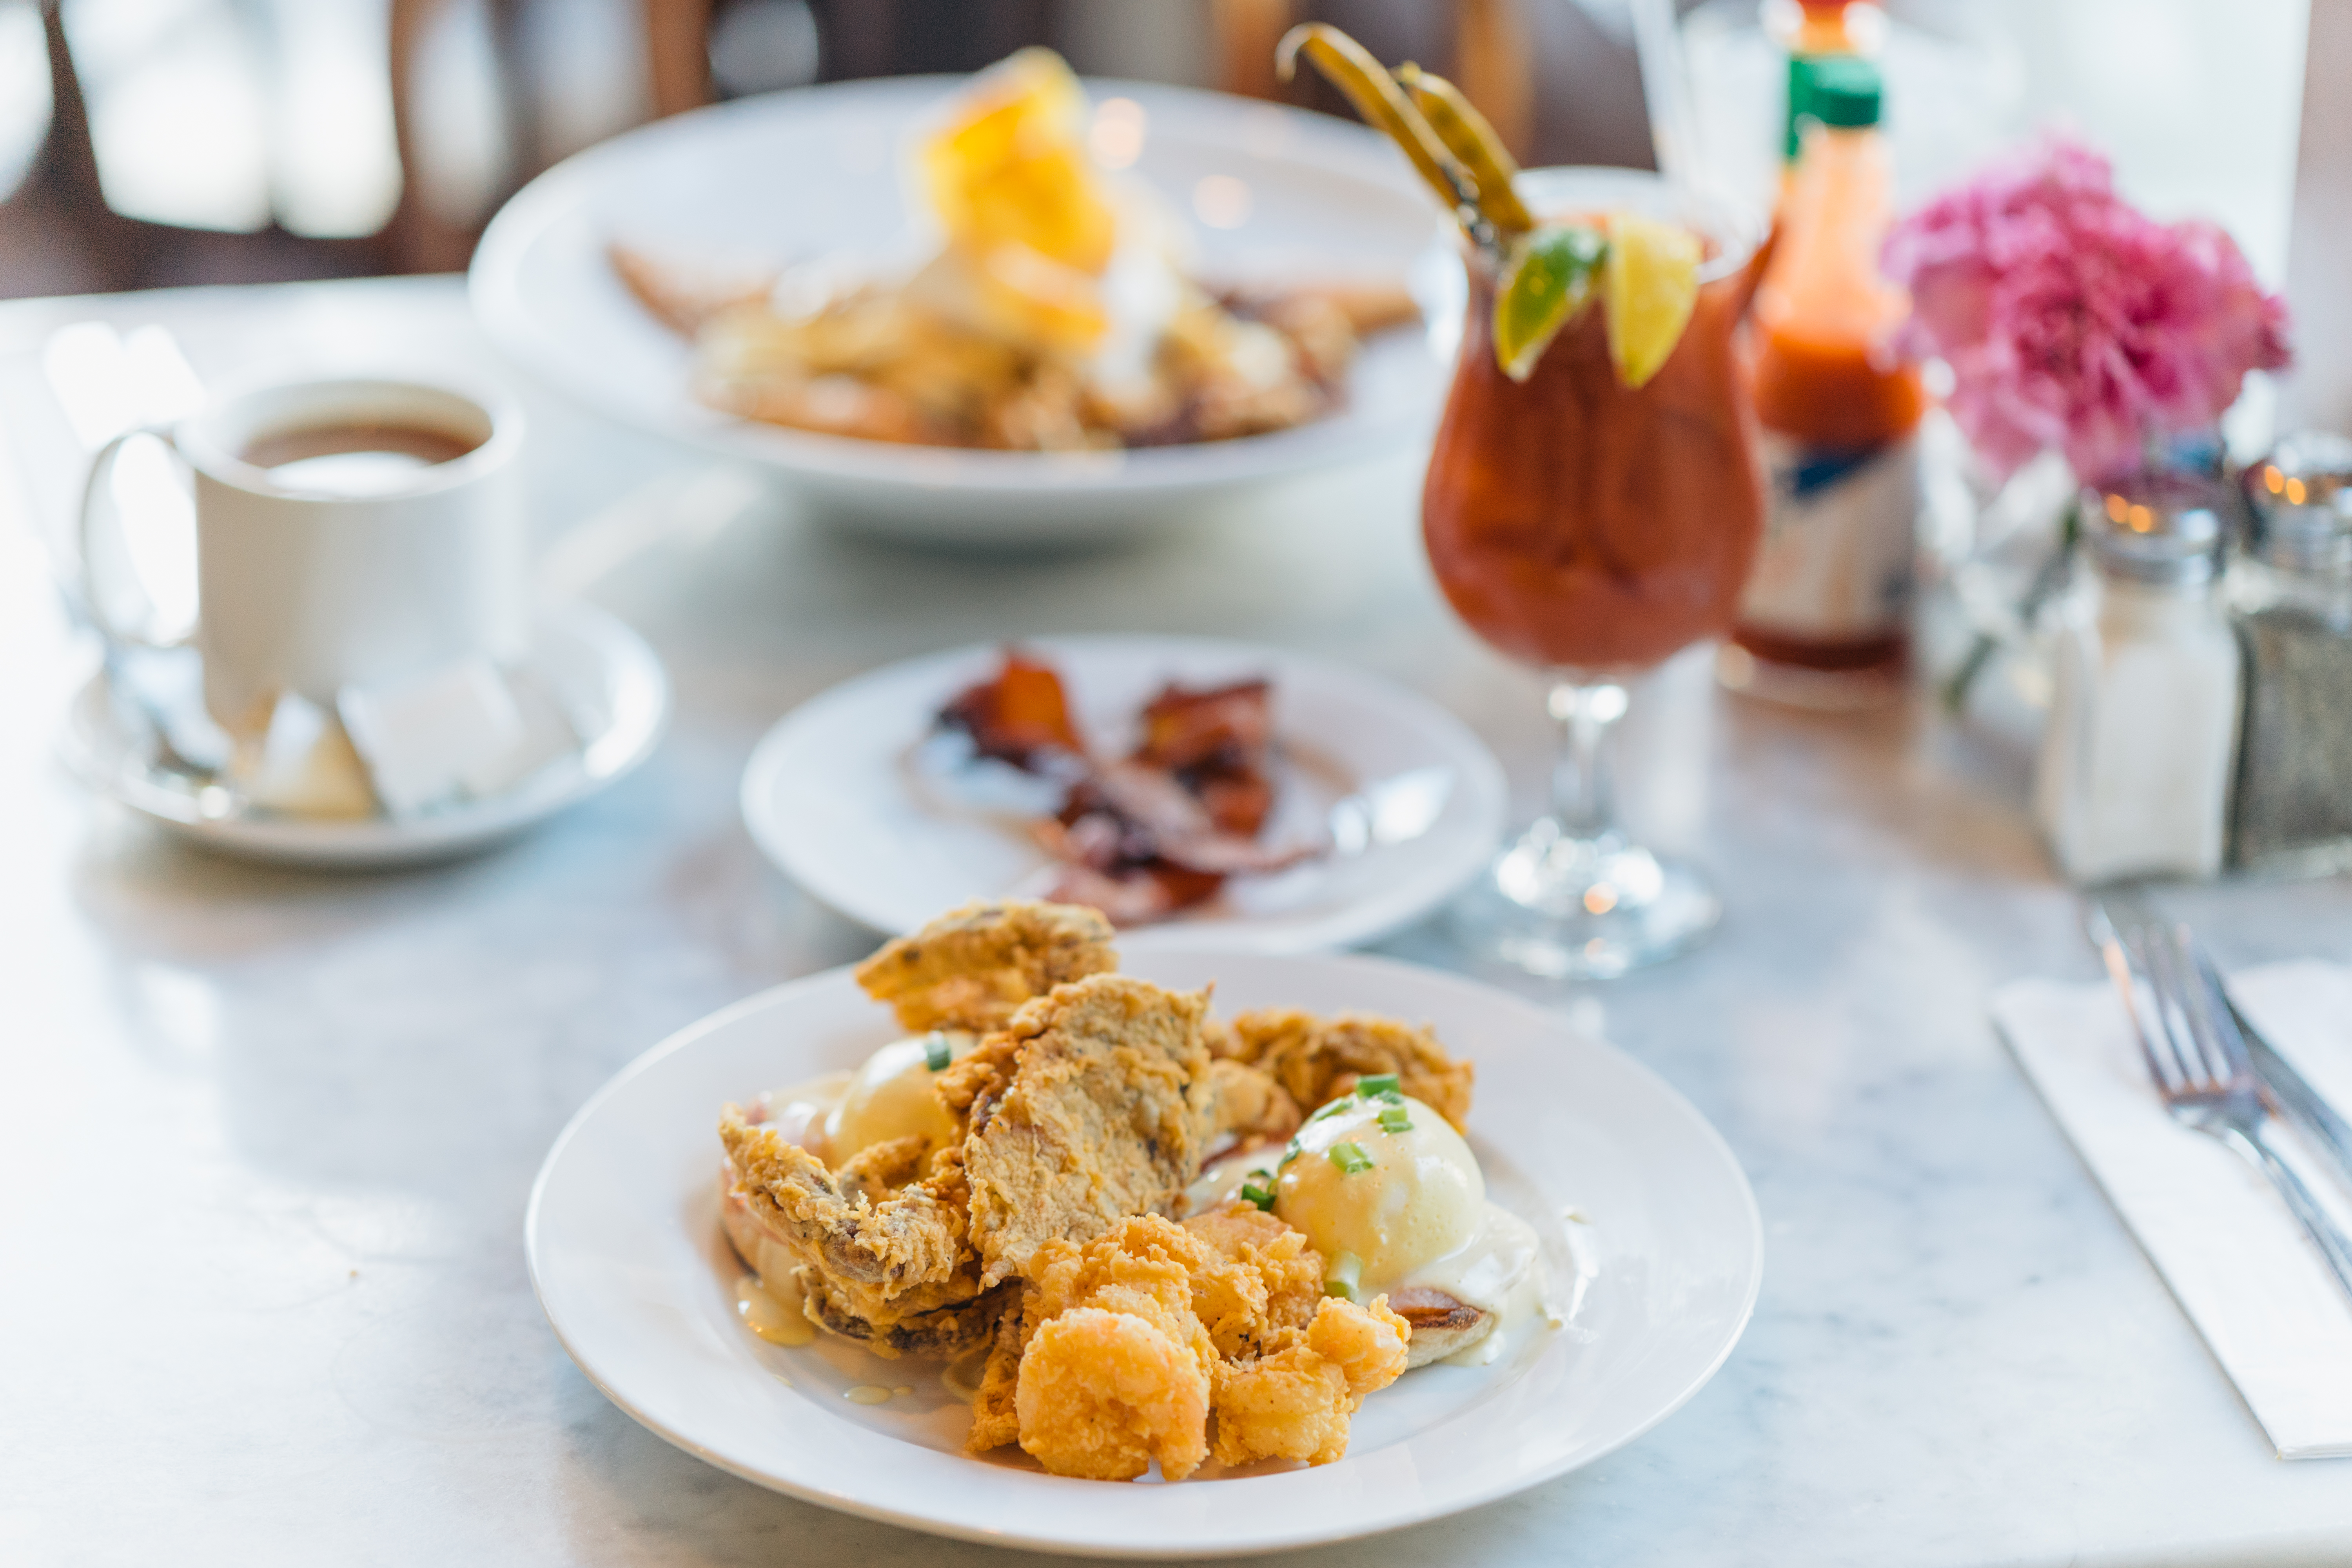 History of Brunch in the US